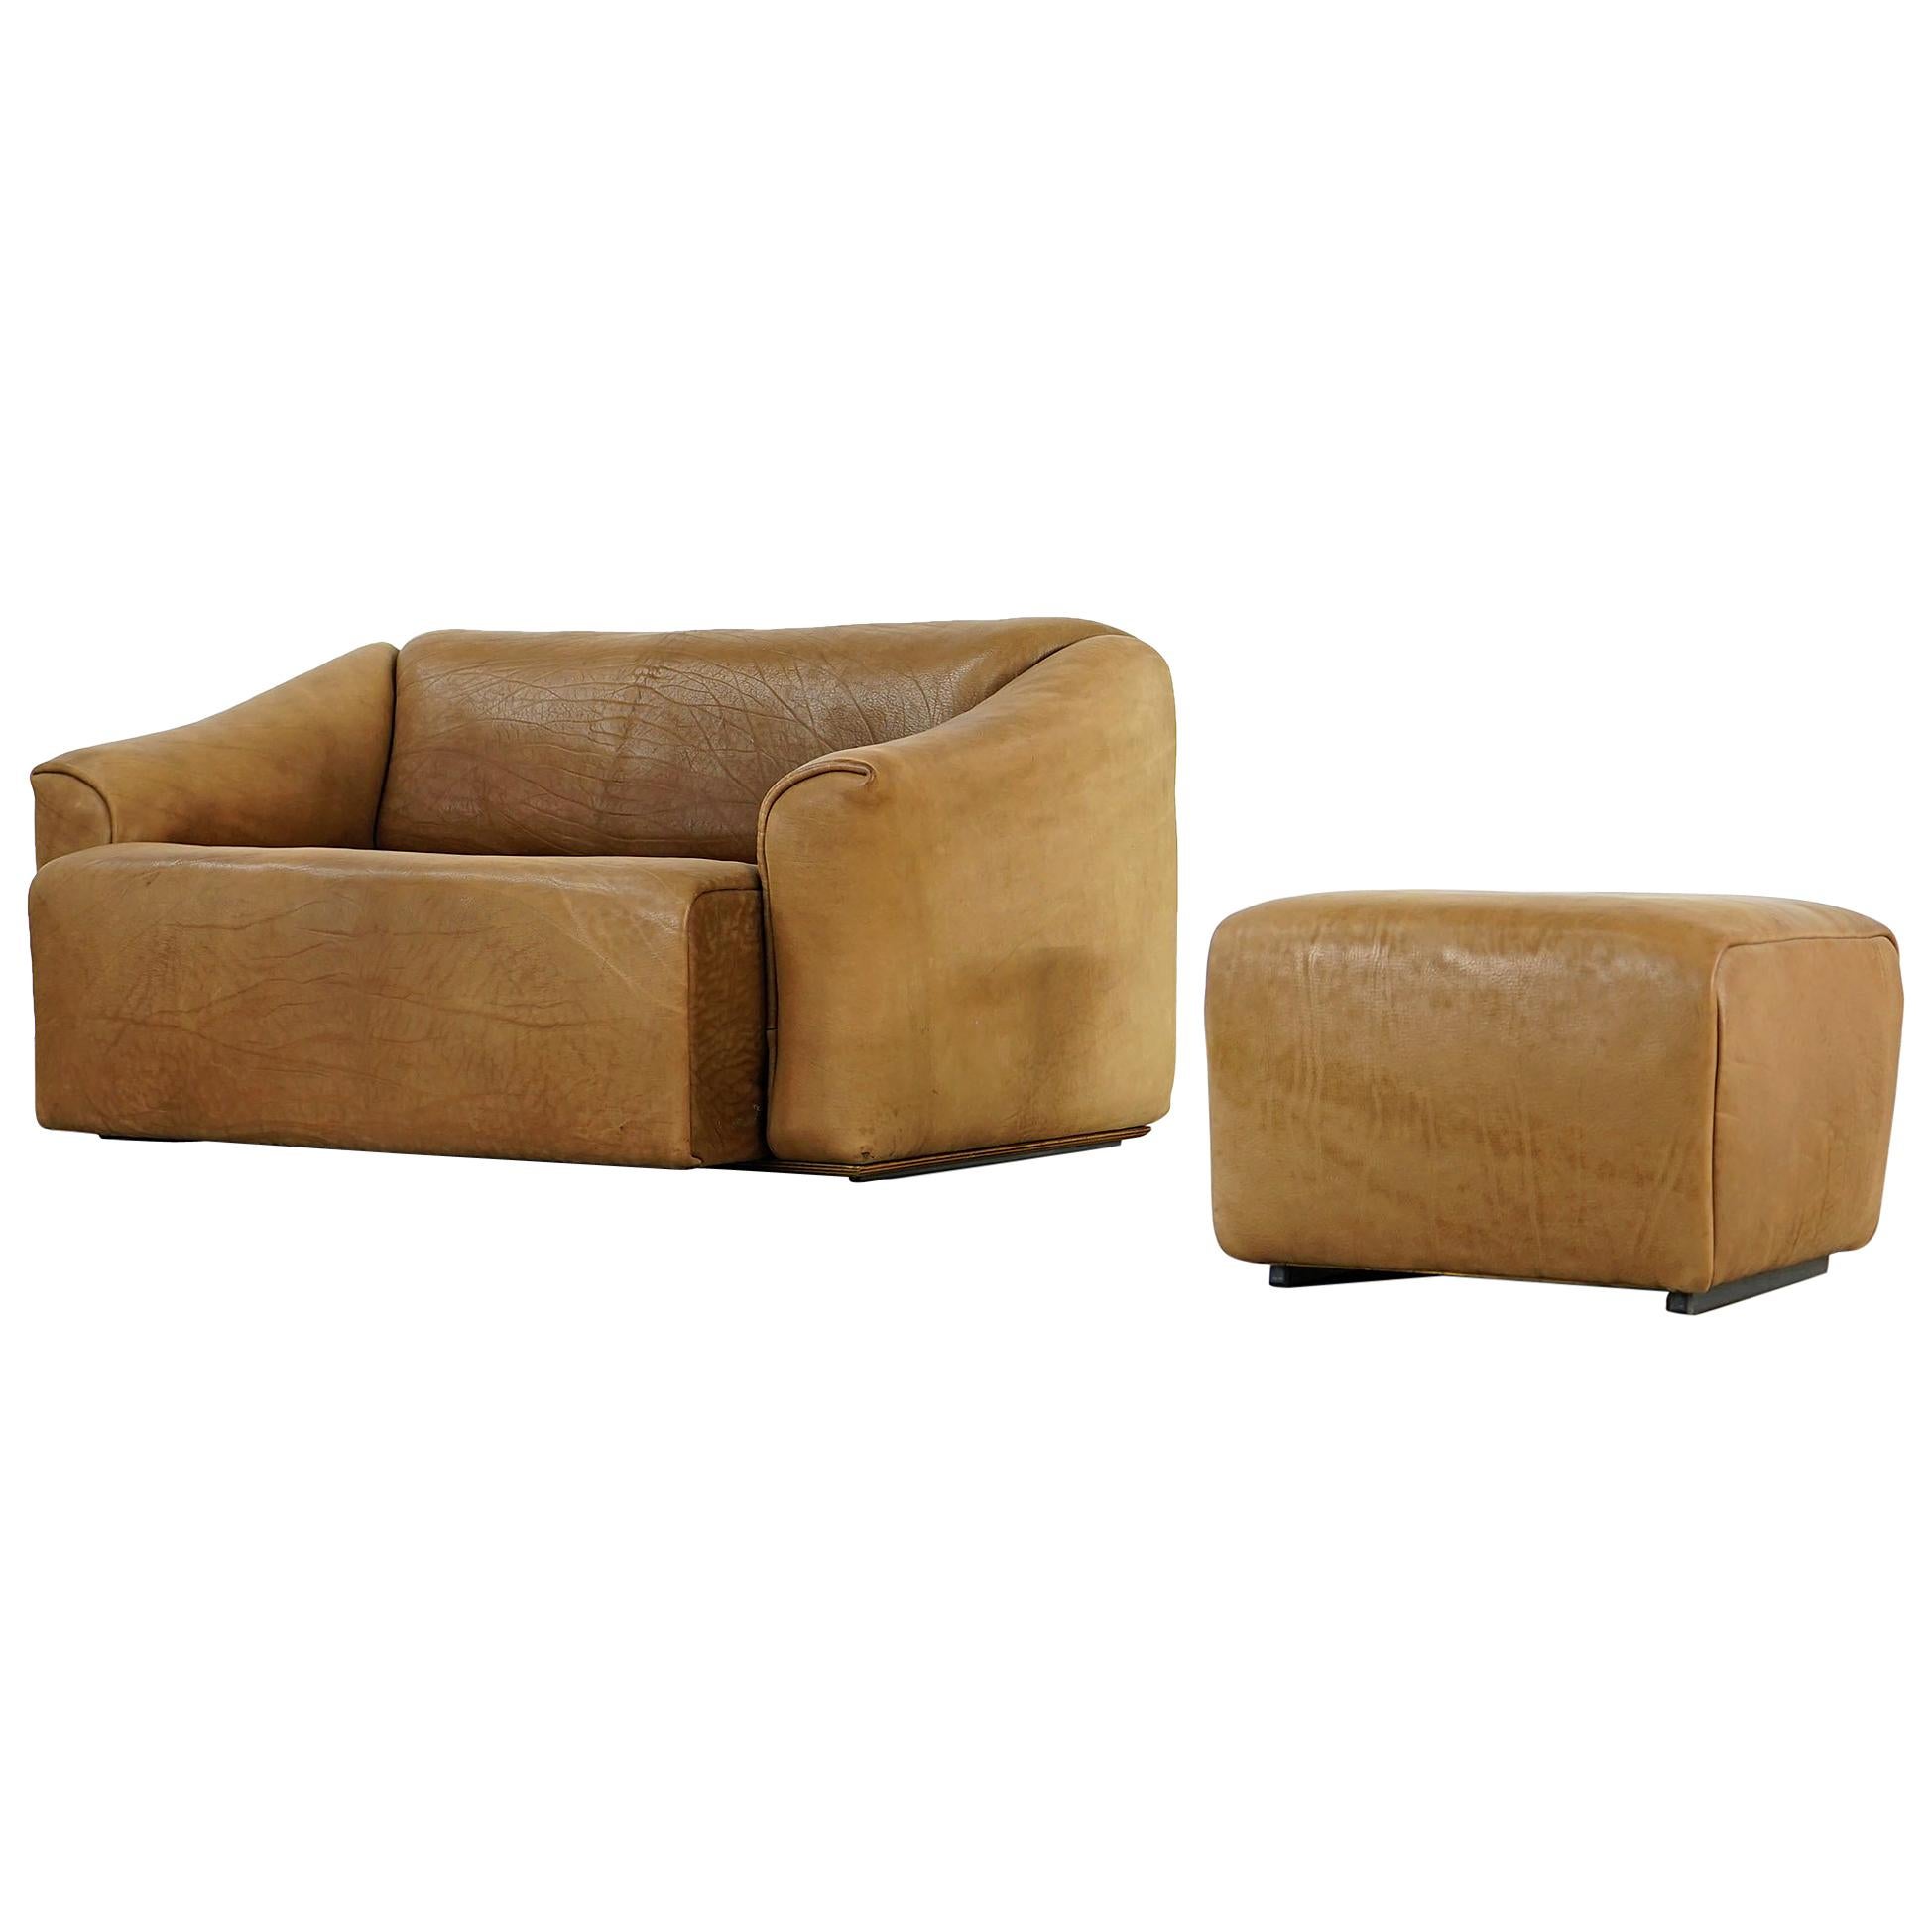 Rustic Two-Seat Sofa and Ottoman Ds 47 by De Sede, 1960s